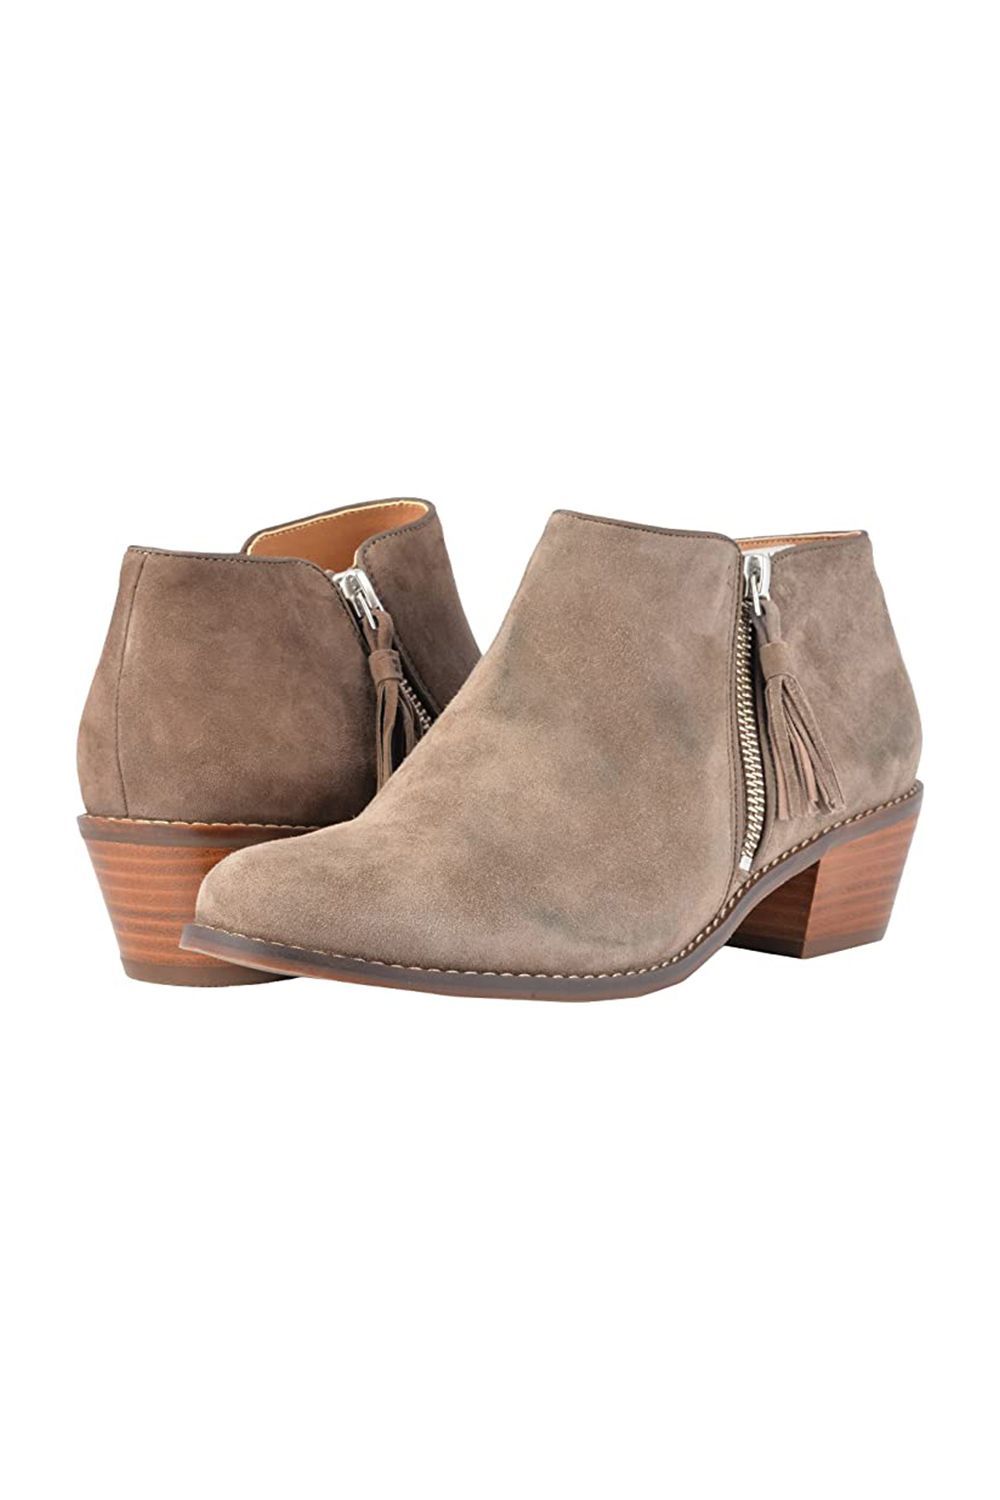 comfy flat ankle boots